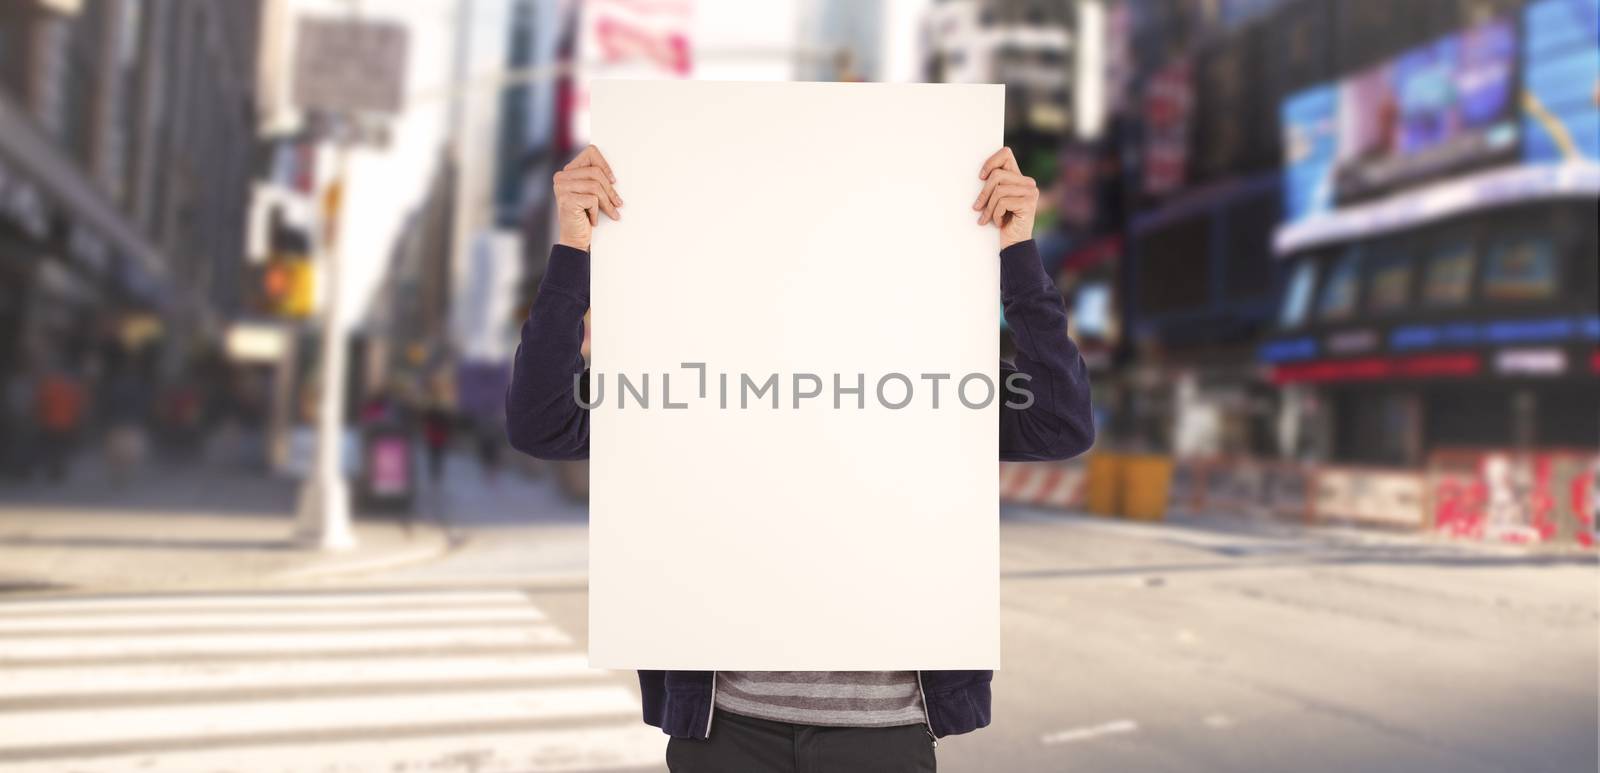 Composite image of man showing billboard in front of face by Wavebreakmedia